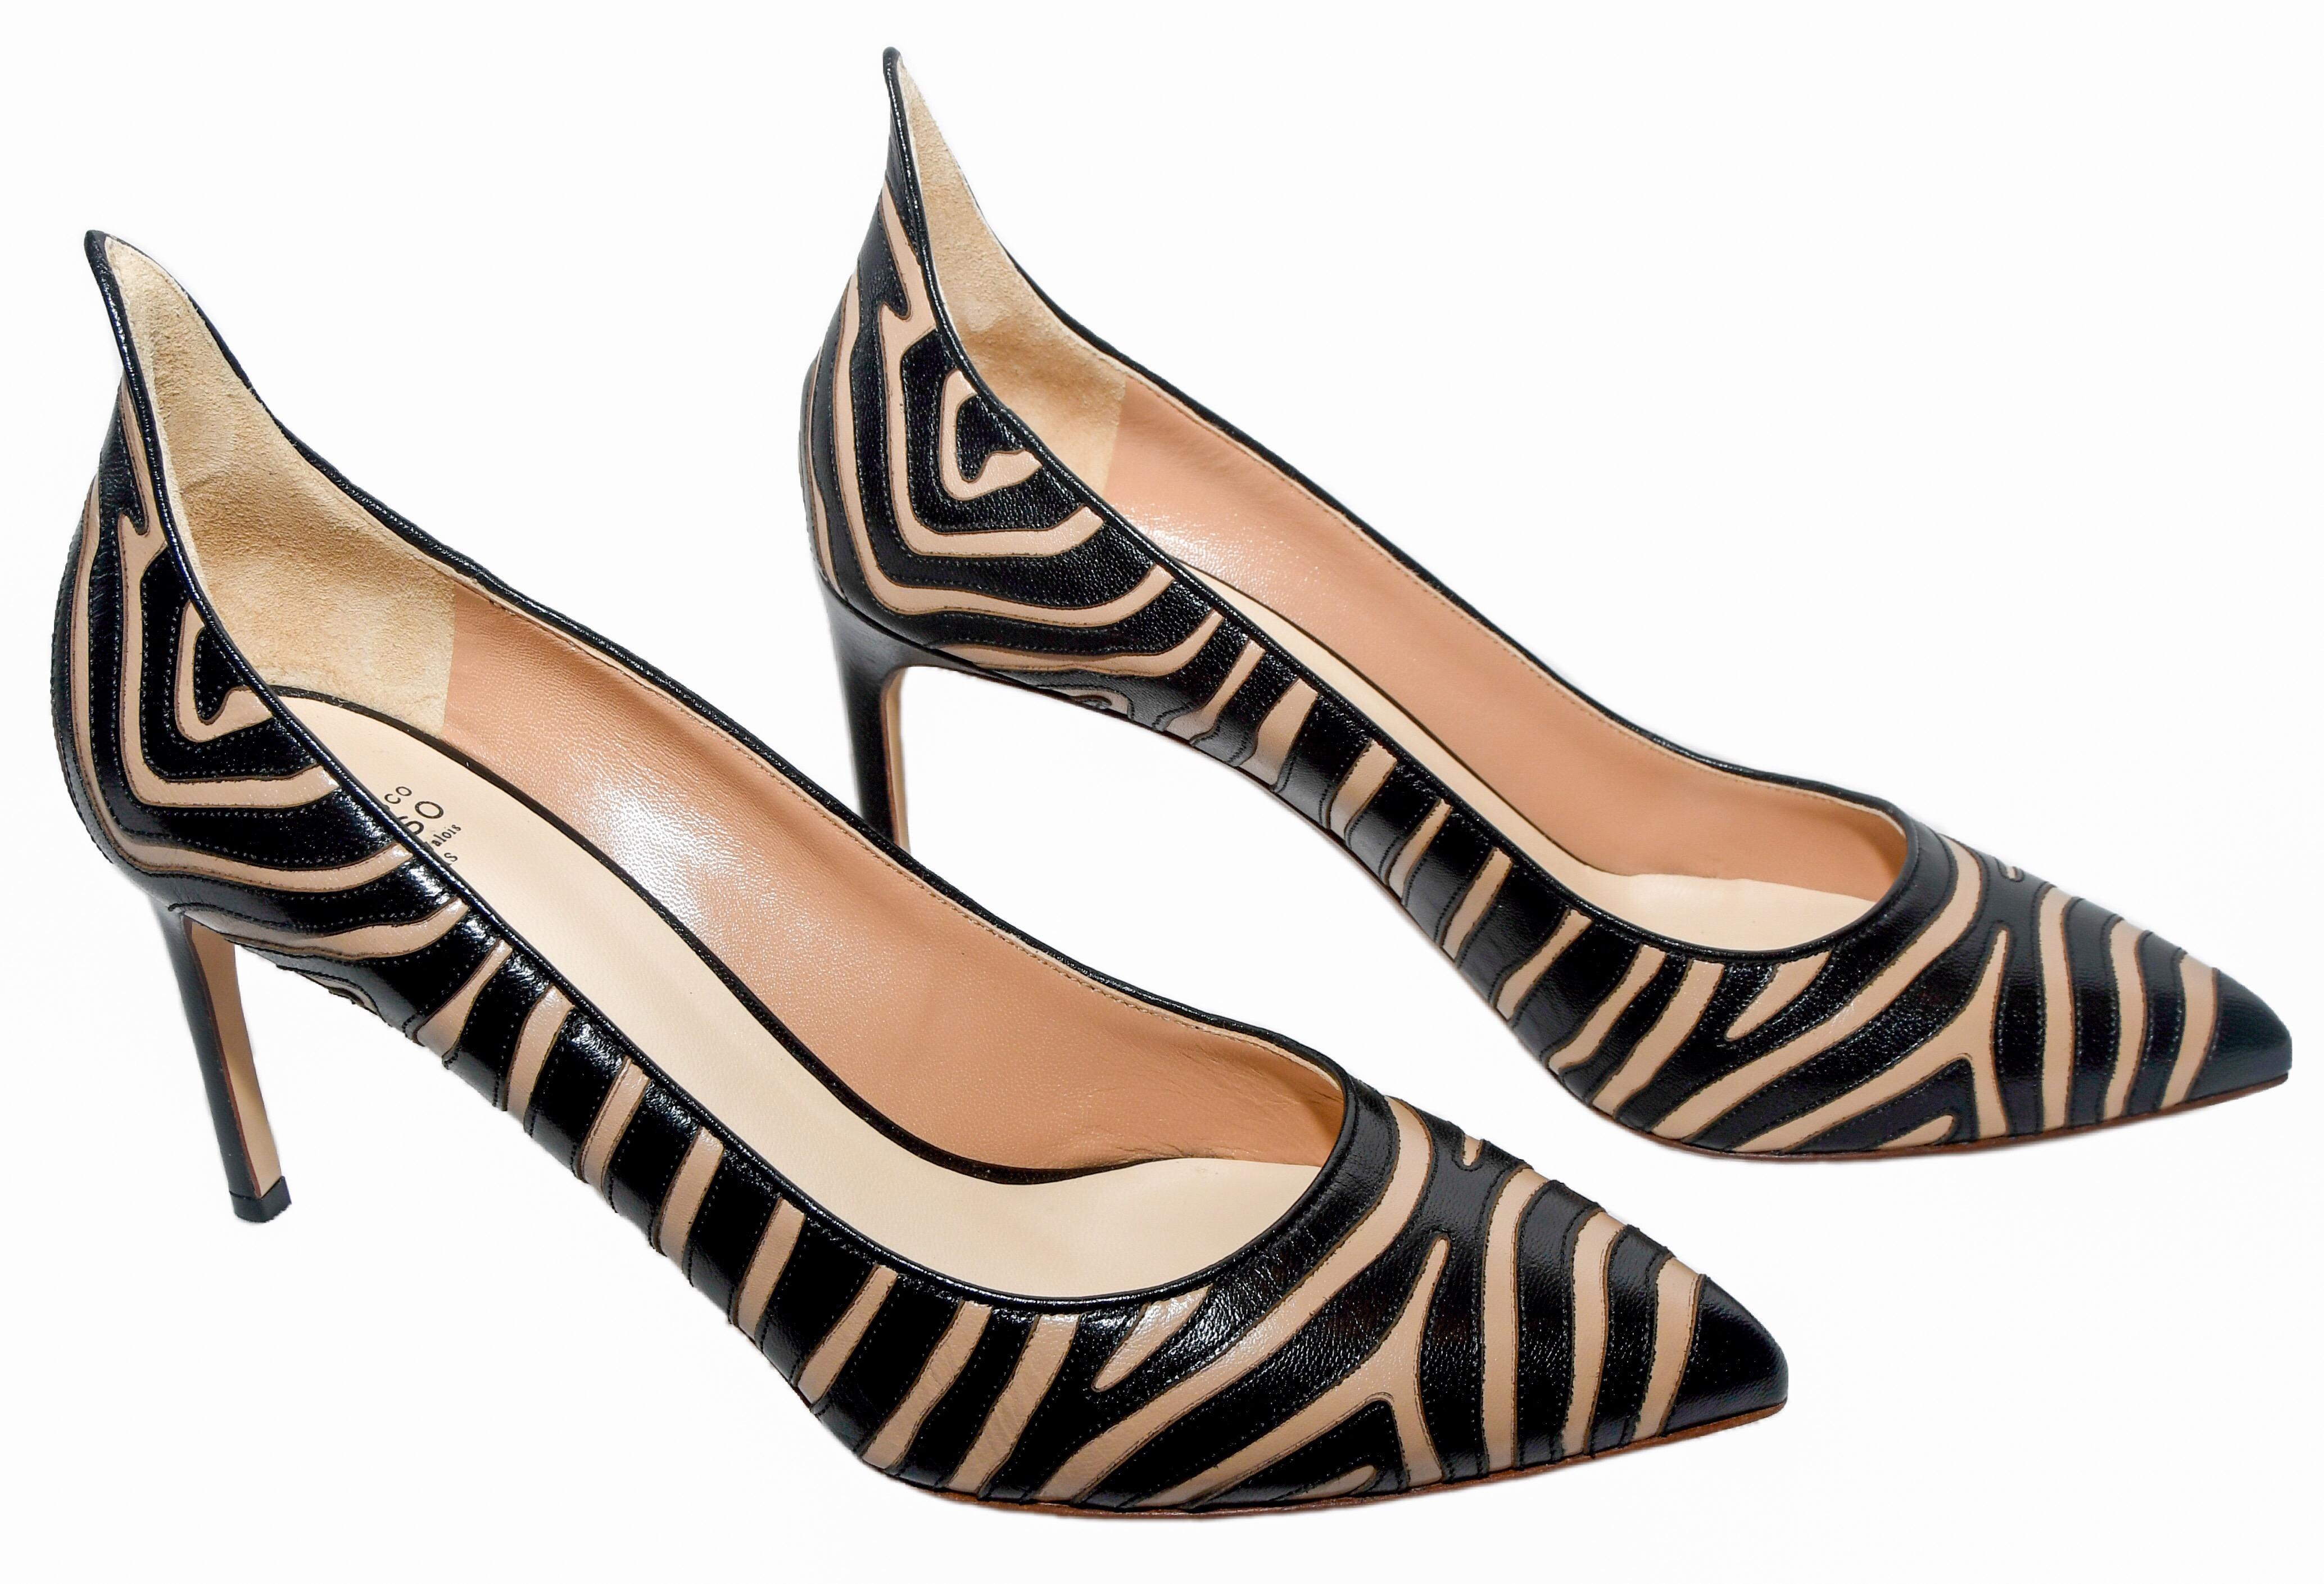 Francesco Russo black and beige leather on leather embroidered Zebra design pumps feature a pointed toe and 4